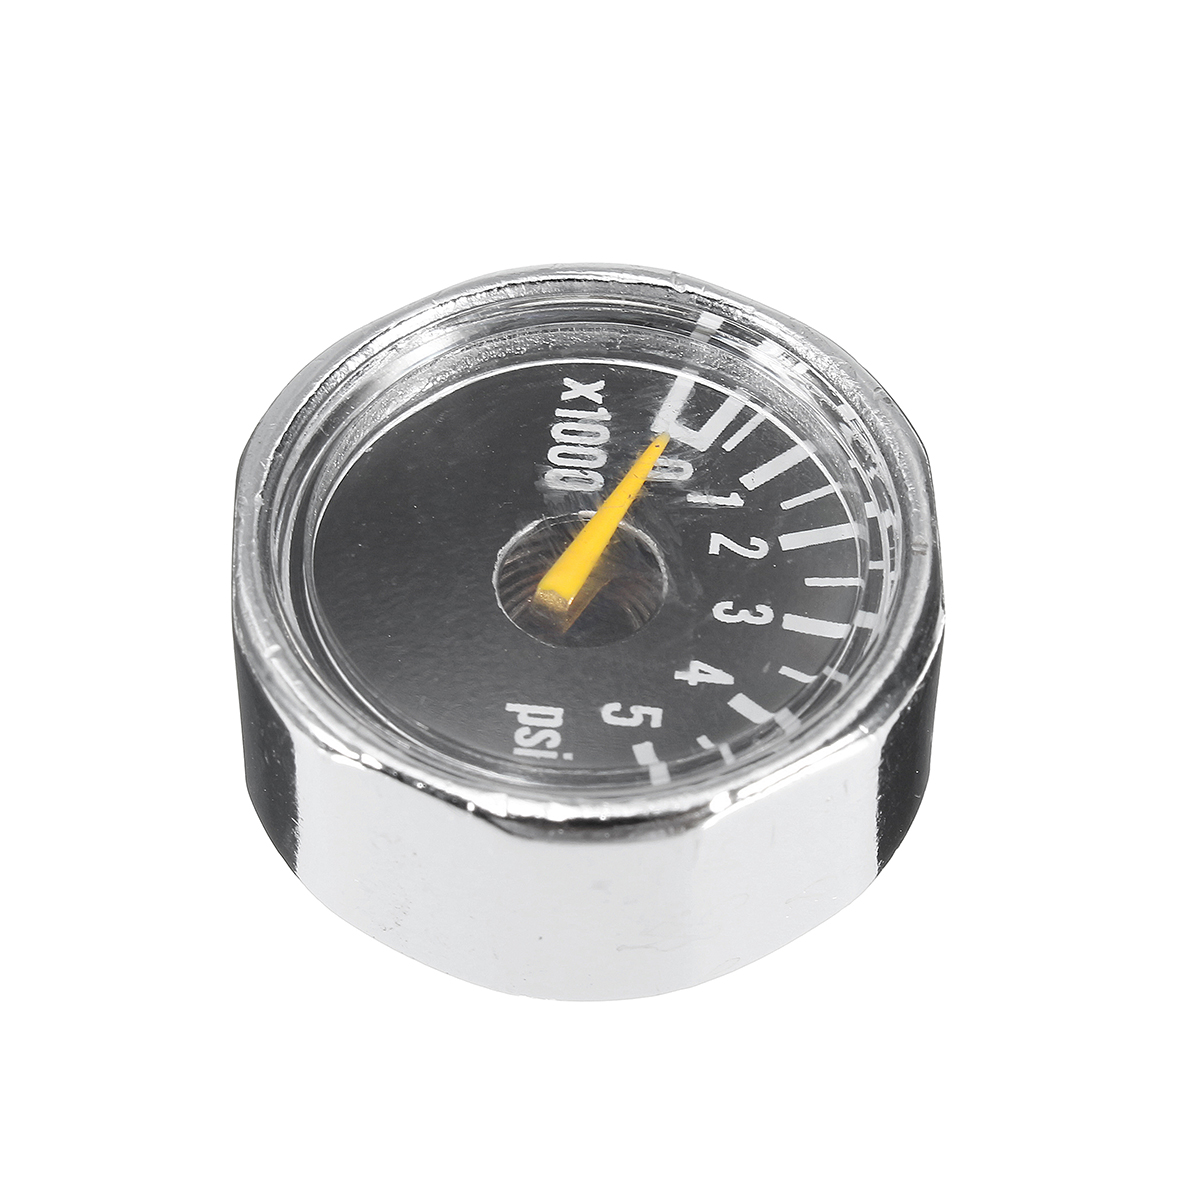 Micro-Gauge-1-inch-25mm-0-to-5000psi-High-Pressure-for-HPA-Paintball-Tank-CO2-PCP-1263873-5